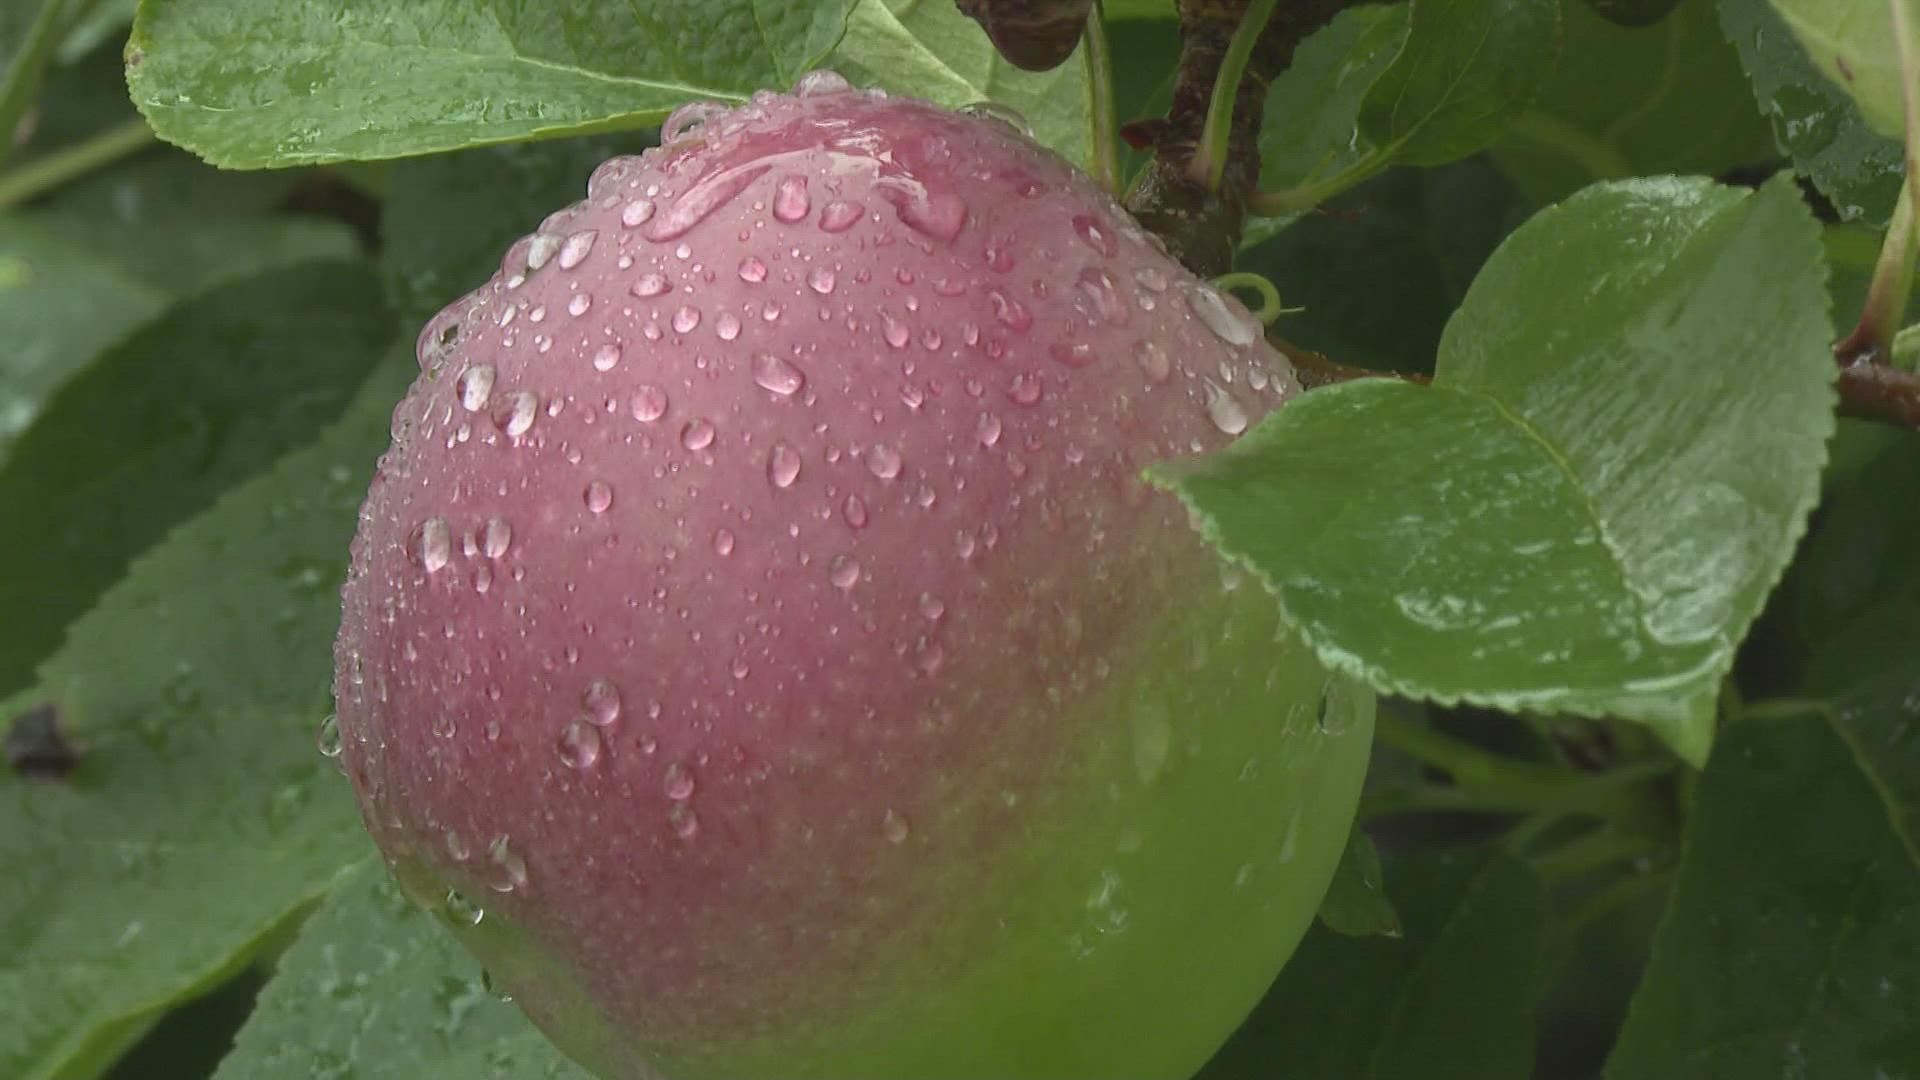 Monday's rain brought moisture to Maine, half of which had faced drought conditions for much of the summer.